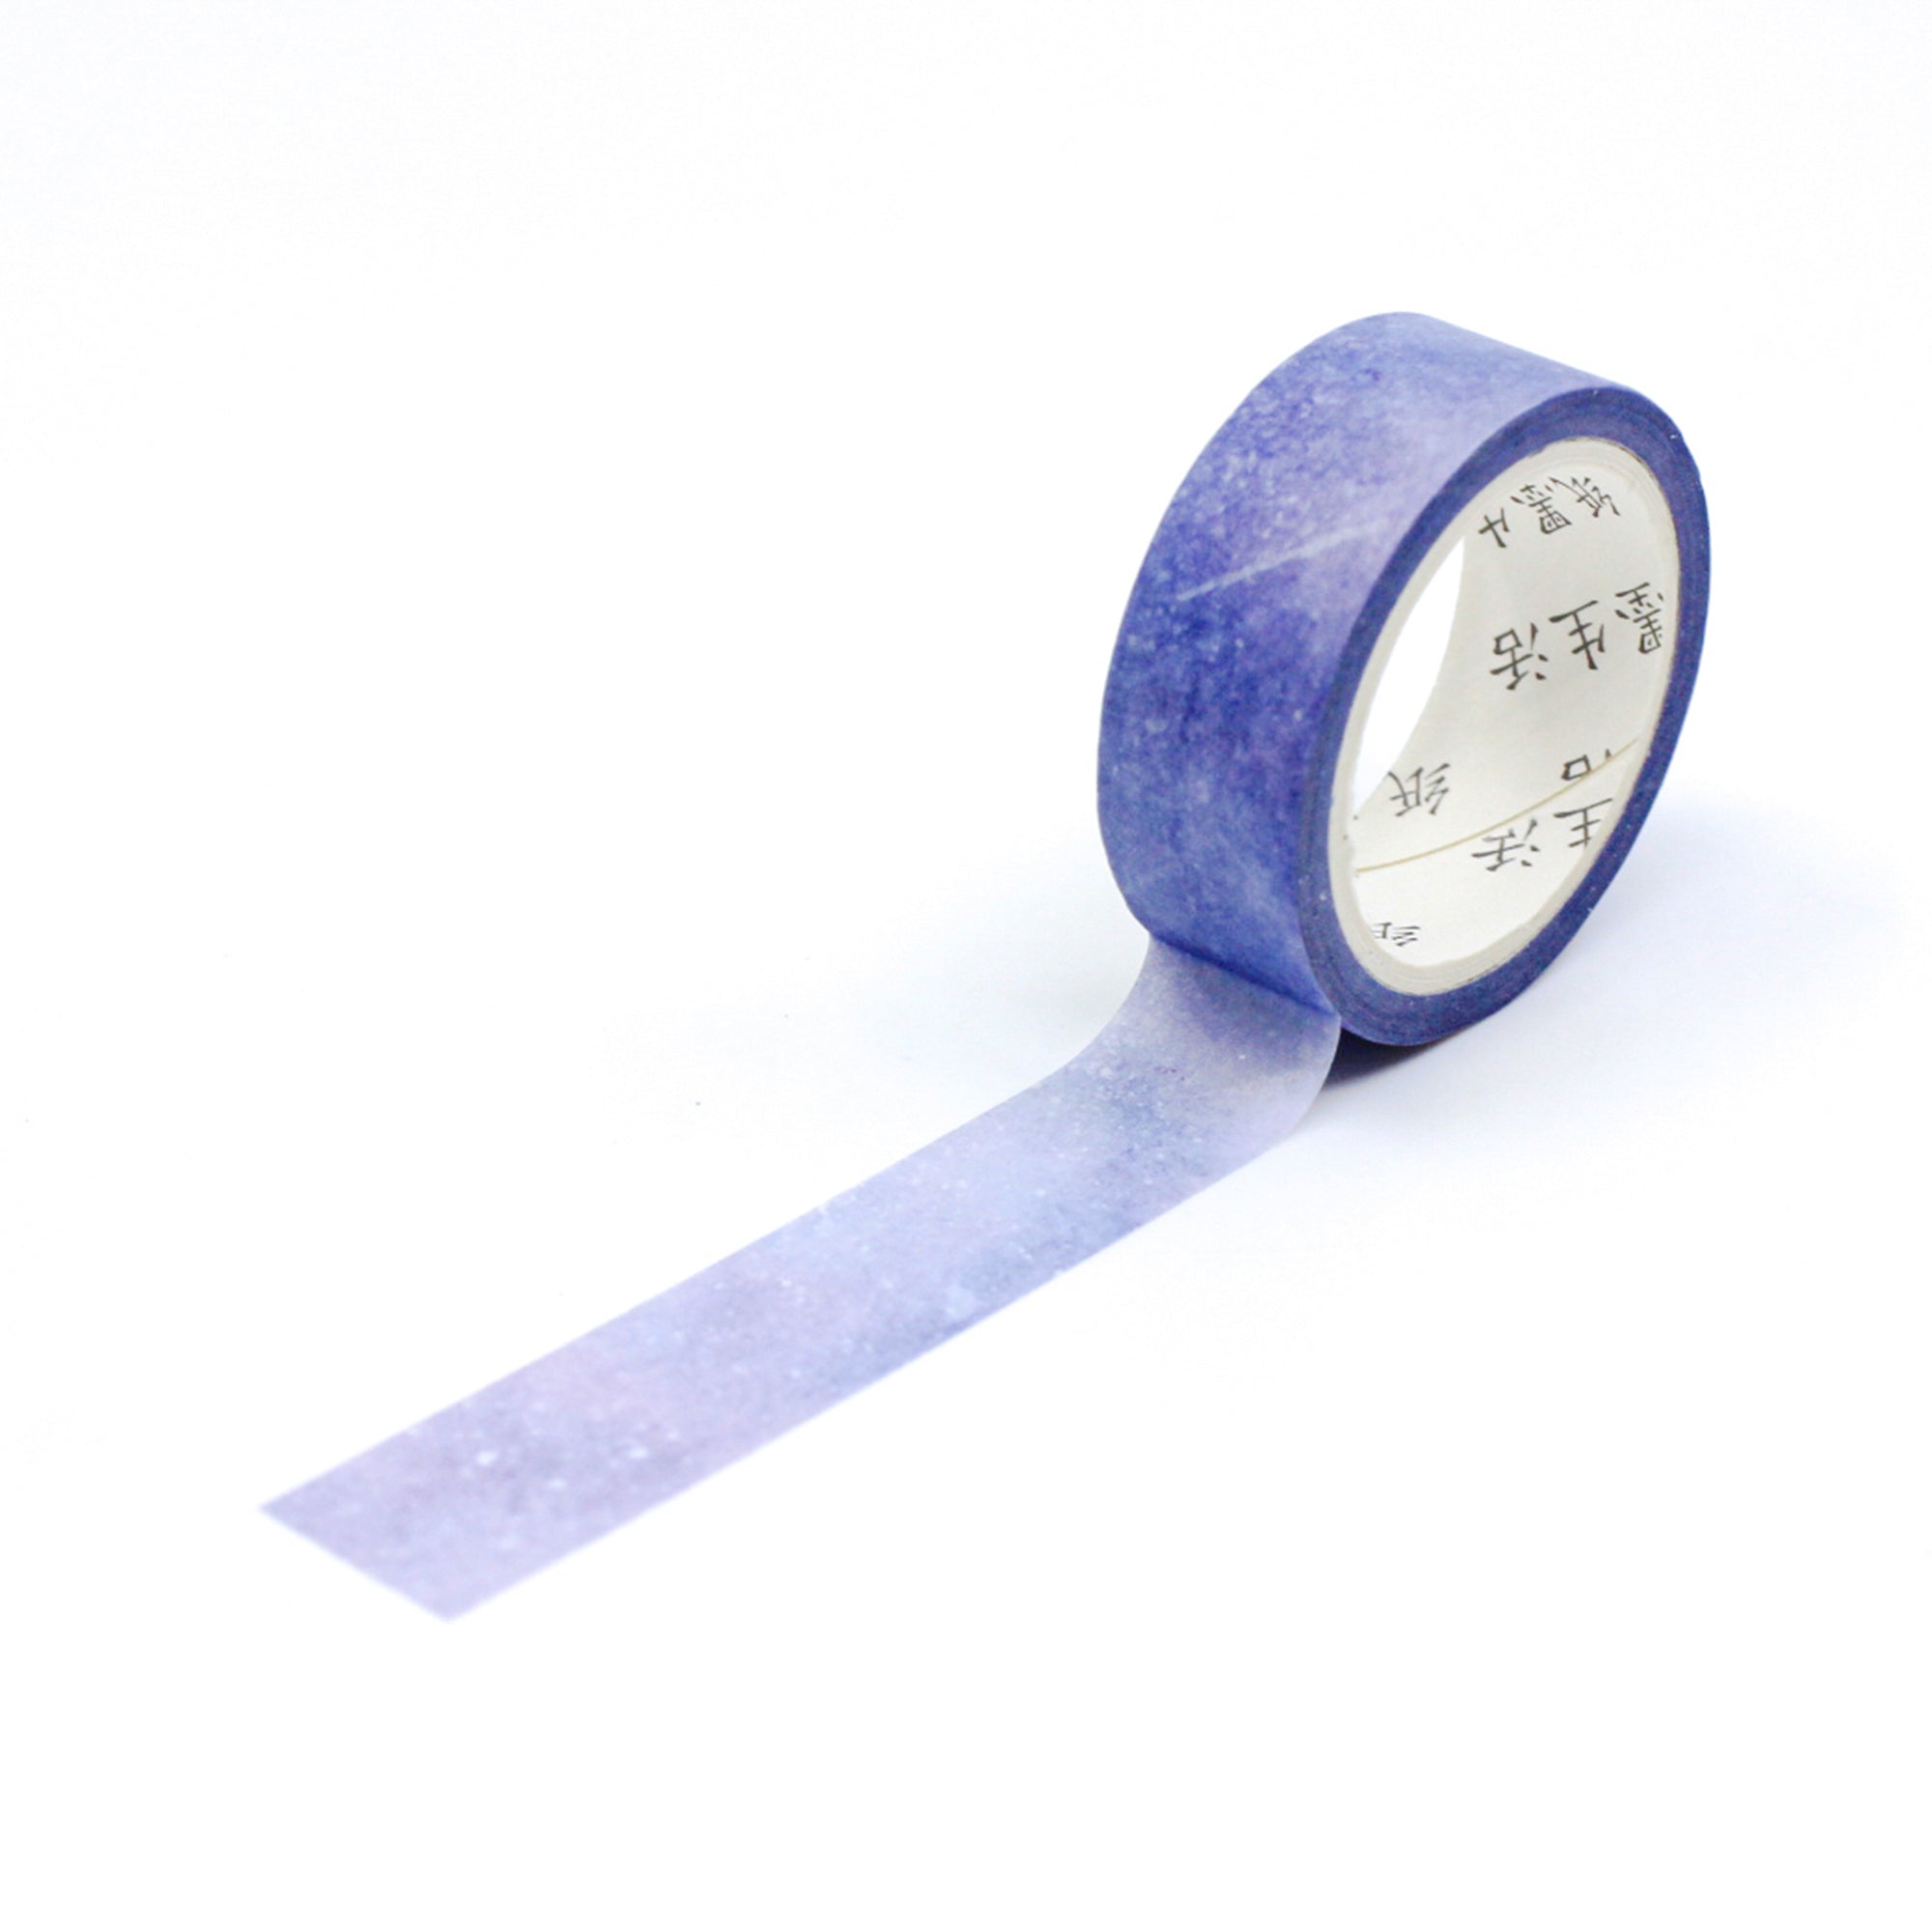 This ombre blue watercolor washi tape is the perfect addition to your washi collection. The simplicity of the pattern is perfect for accenting and matching any project's theme while adding a beautiful and interesting pattern. This tape is sold at BBB Supplies Craft Shop.